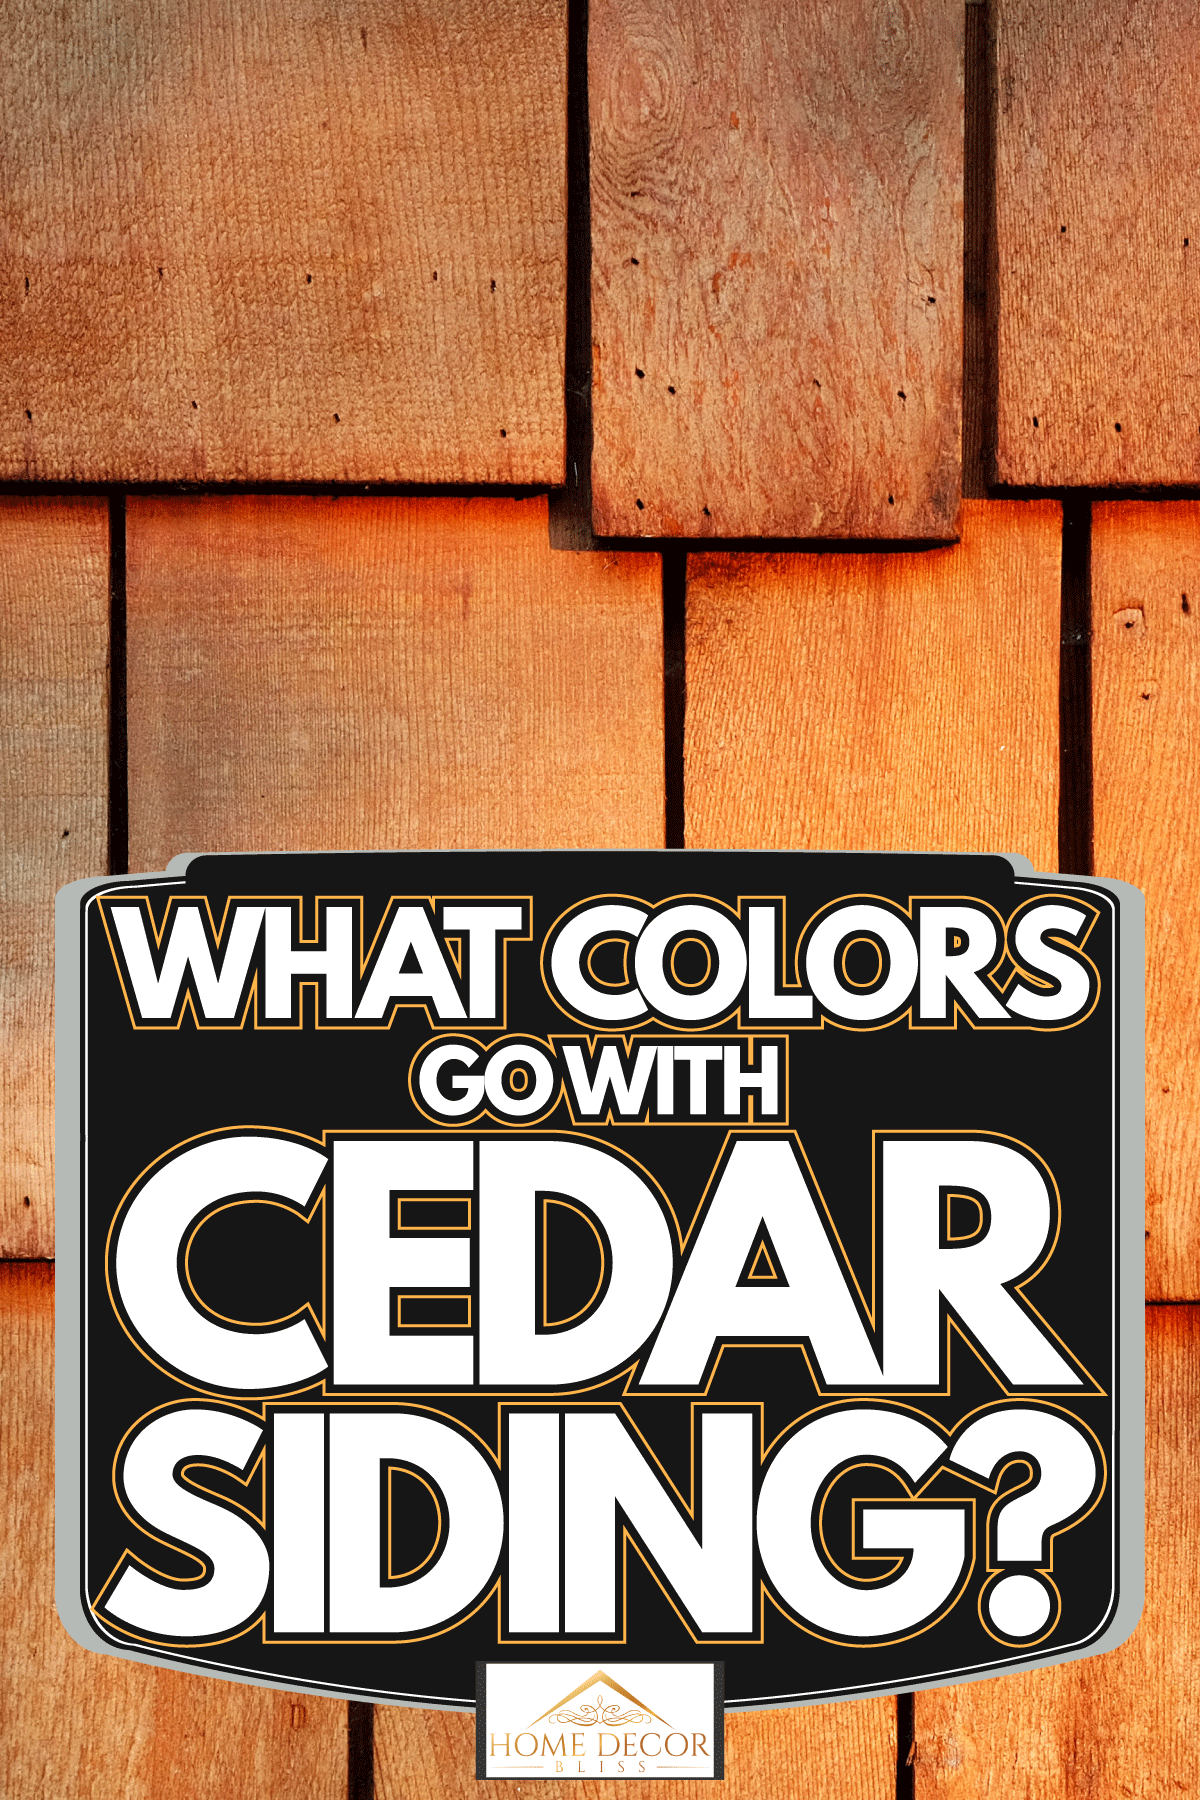 Abstract wooden texture of red cedar shingles, shake wood siding row roof panel, What Colors Goes With Cedar Siding?